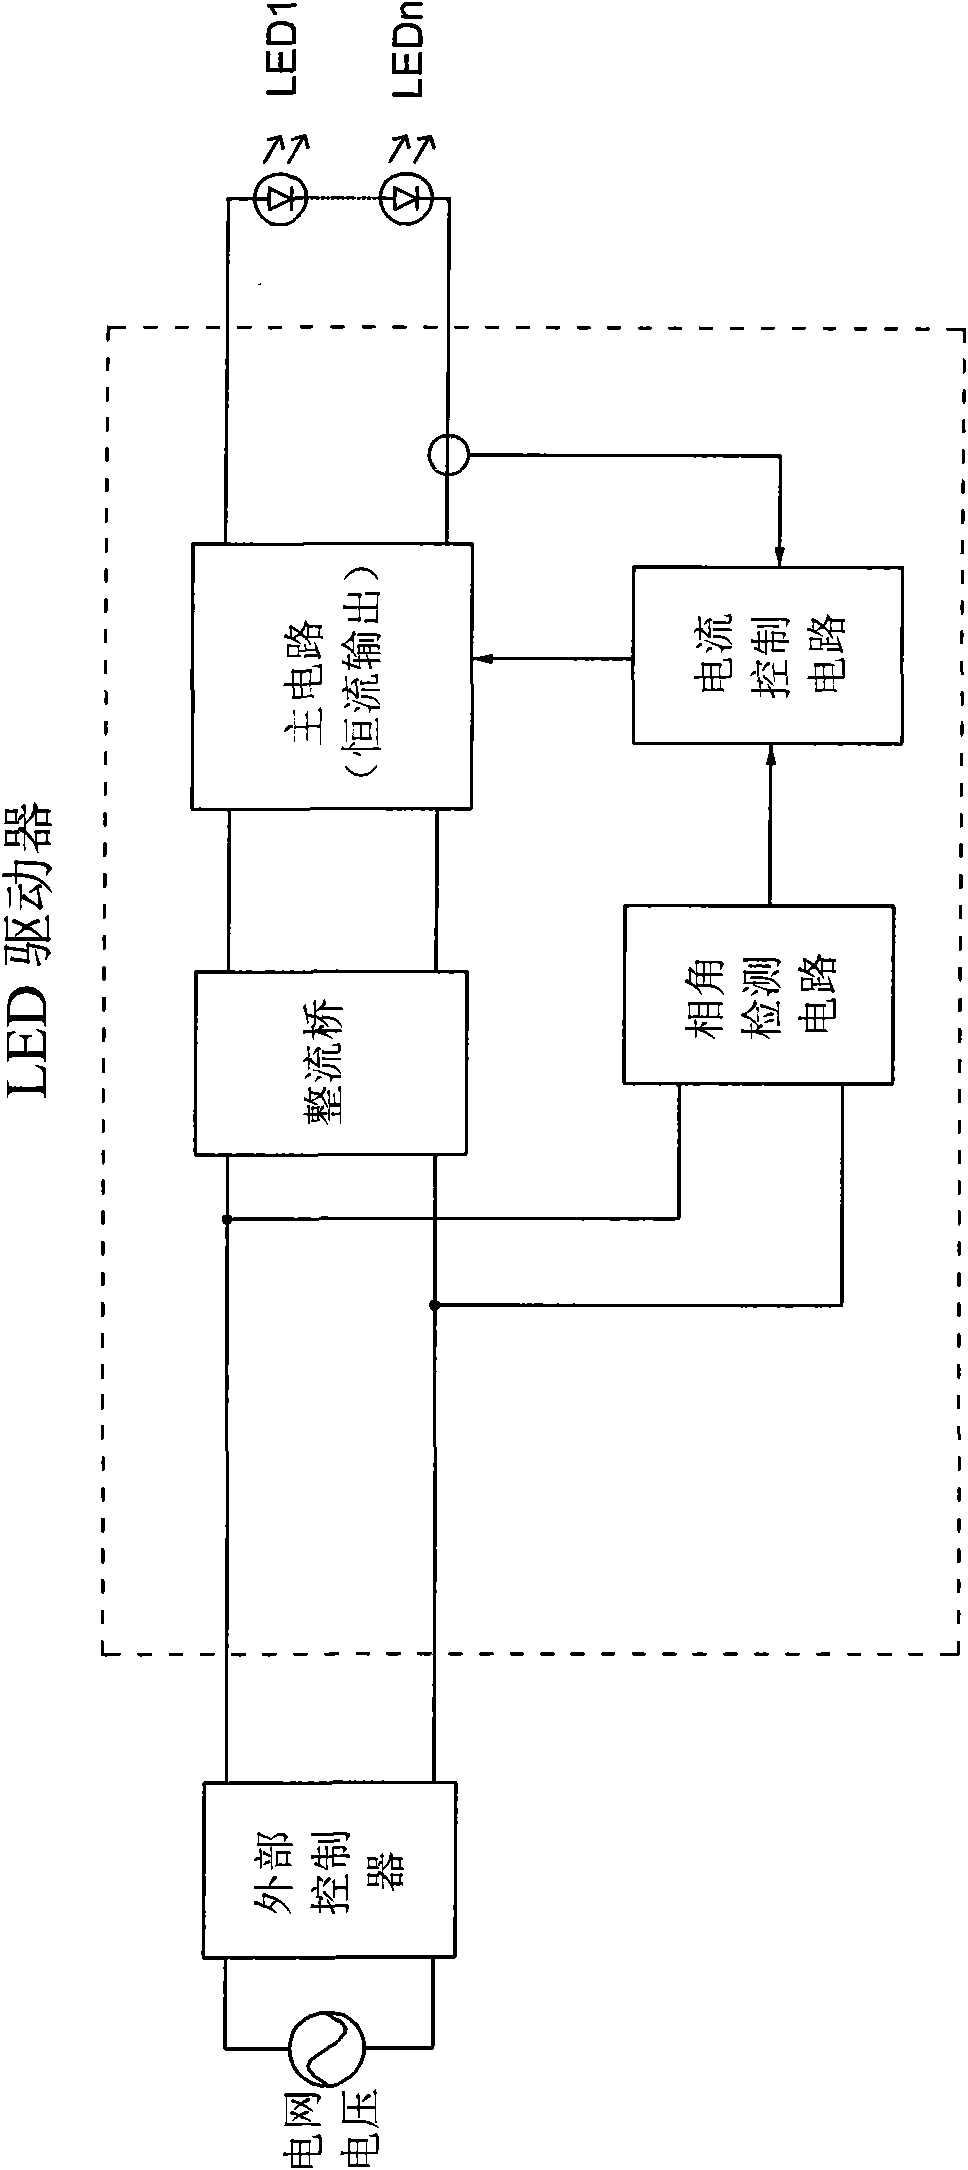 LED drive circuit suitable for controlled silicon light adjustment